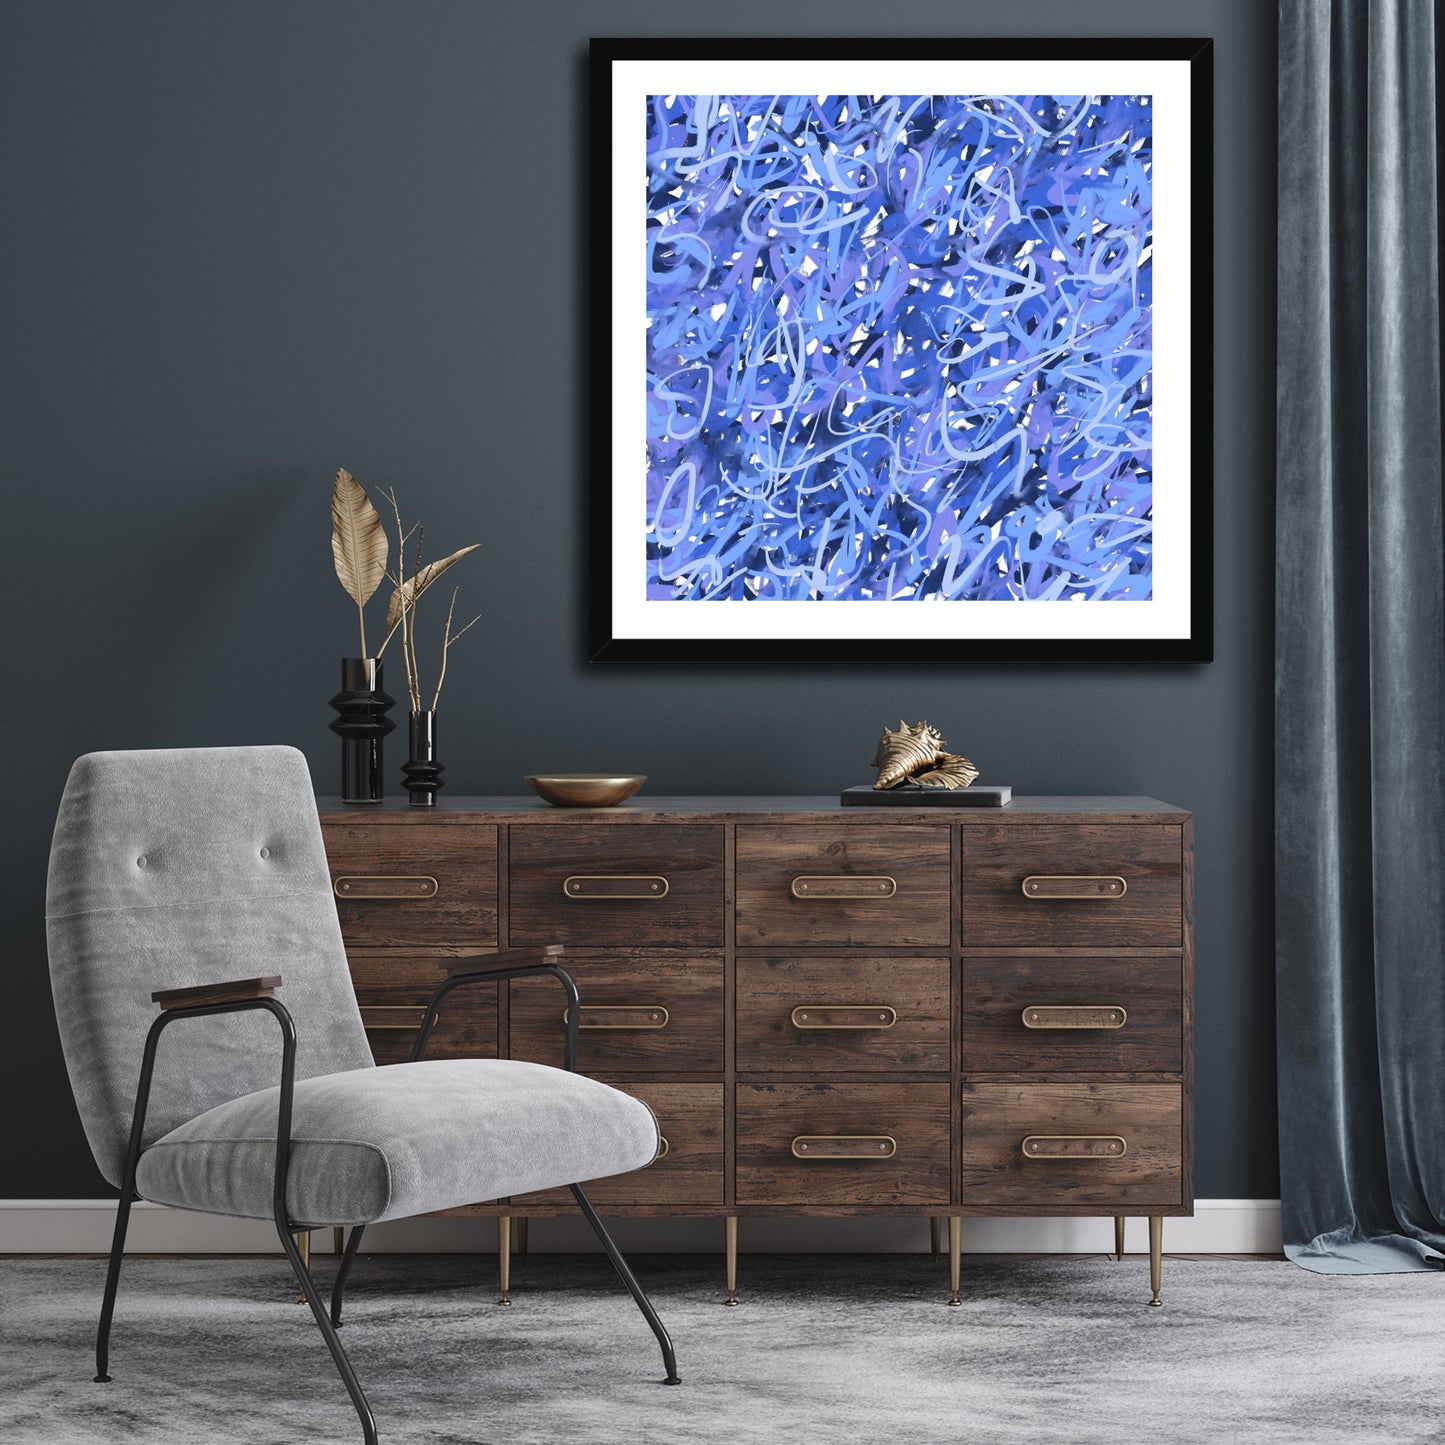 The black-framed 'A Touch Of Frost' stands out with the darker tones of this room. The wall is grey-blue with matching velvet curtain to one side and below the art, a multi-drawer natural wood sideboard with gold pull handles. In the foreground, a modern pale blue velvet-covered chair, again picking up on the frosty blues of the artwork.